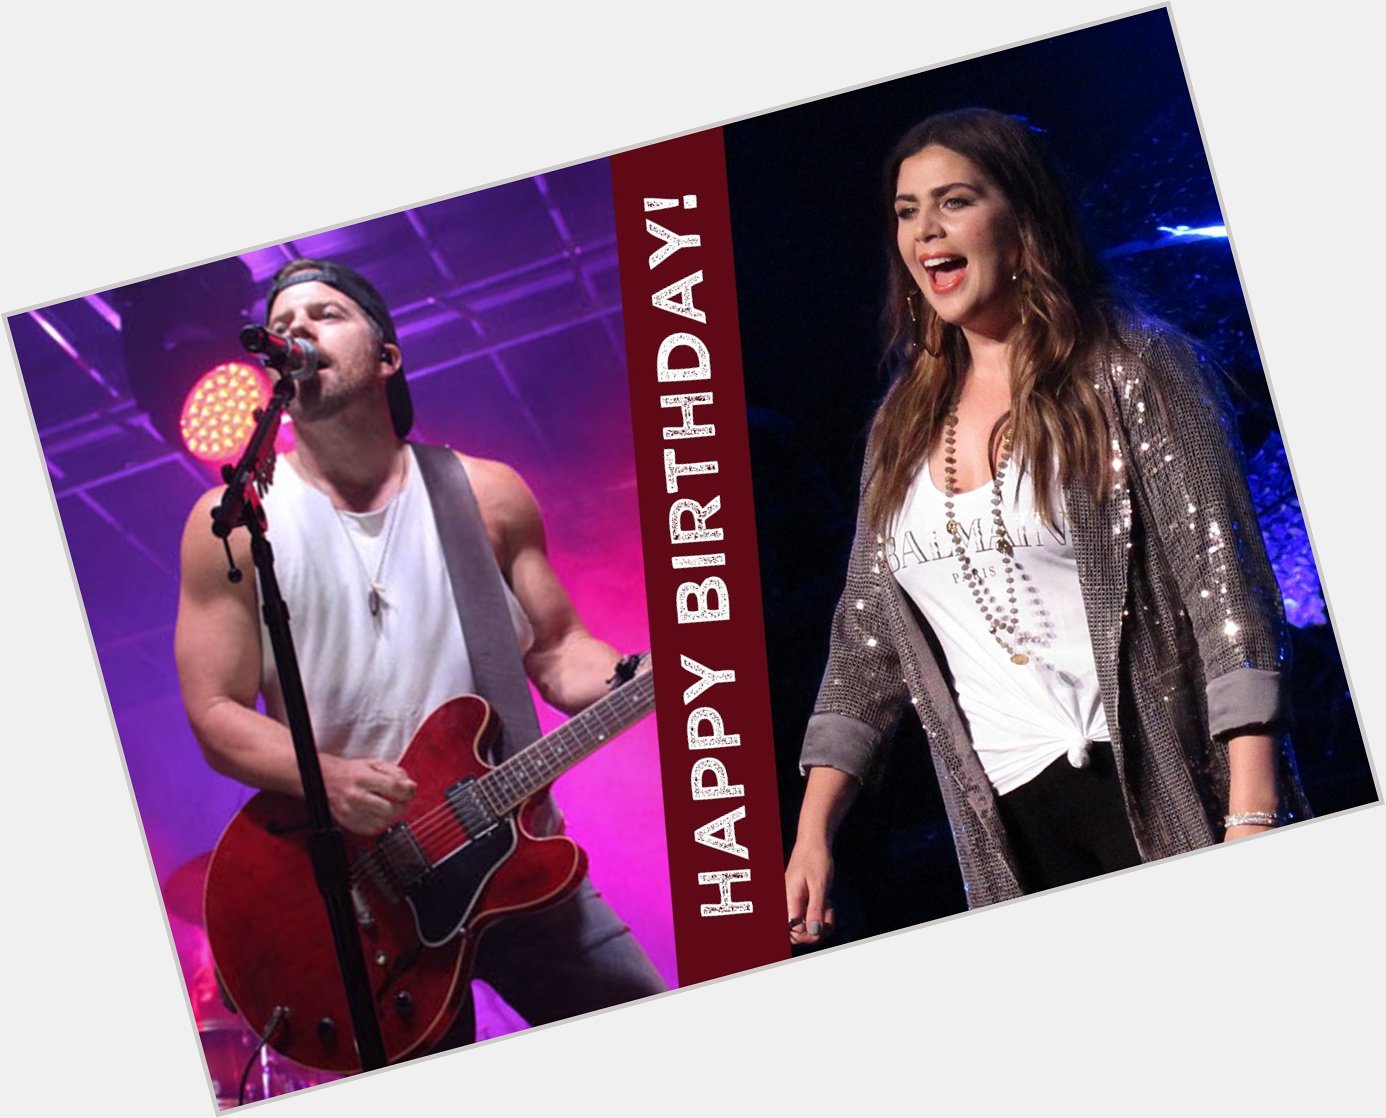 We\ve got another double birthday! Wishing a very happy birthday to Hillary Scott and Kip Moore 